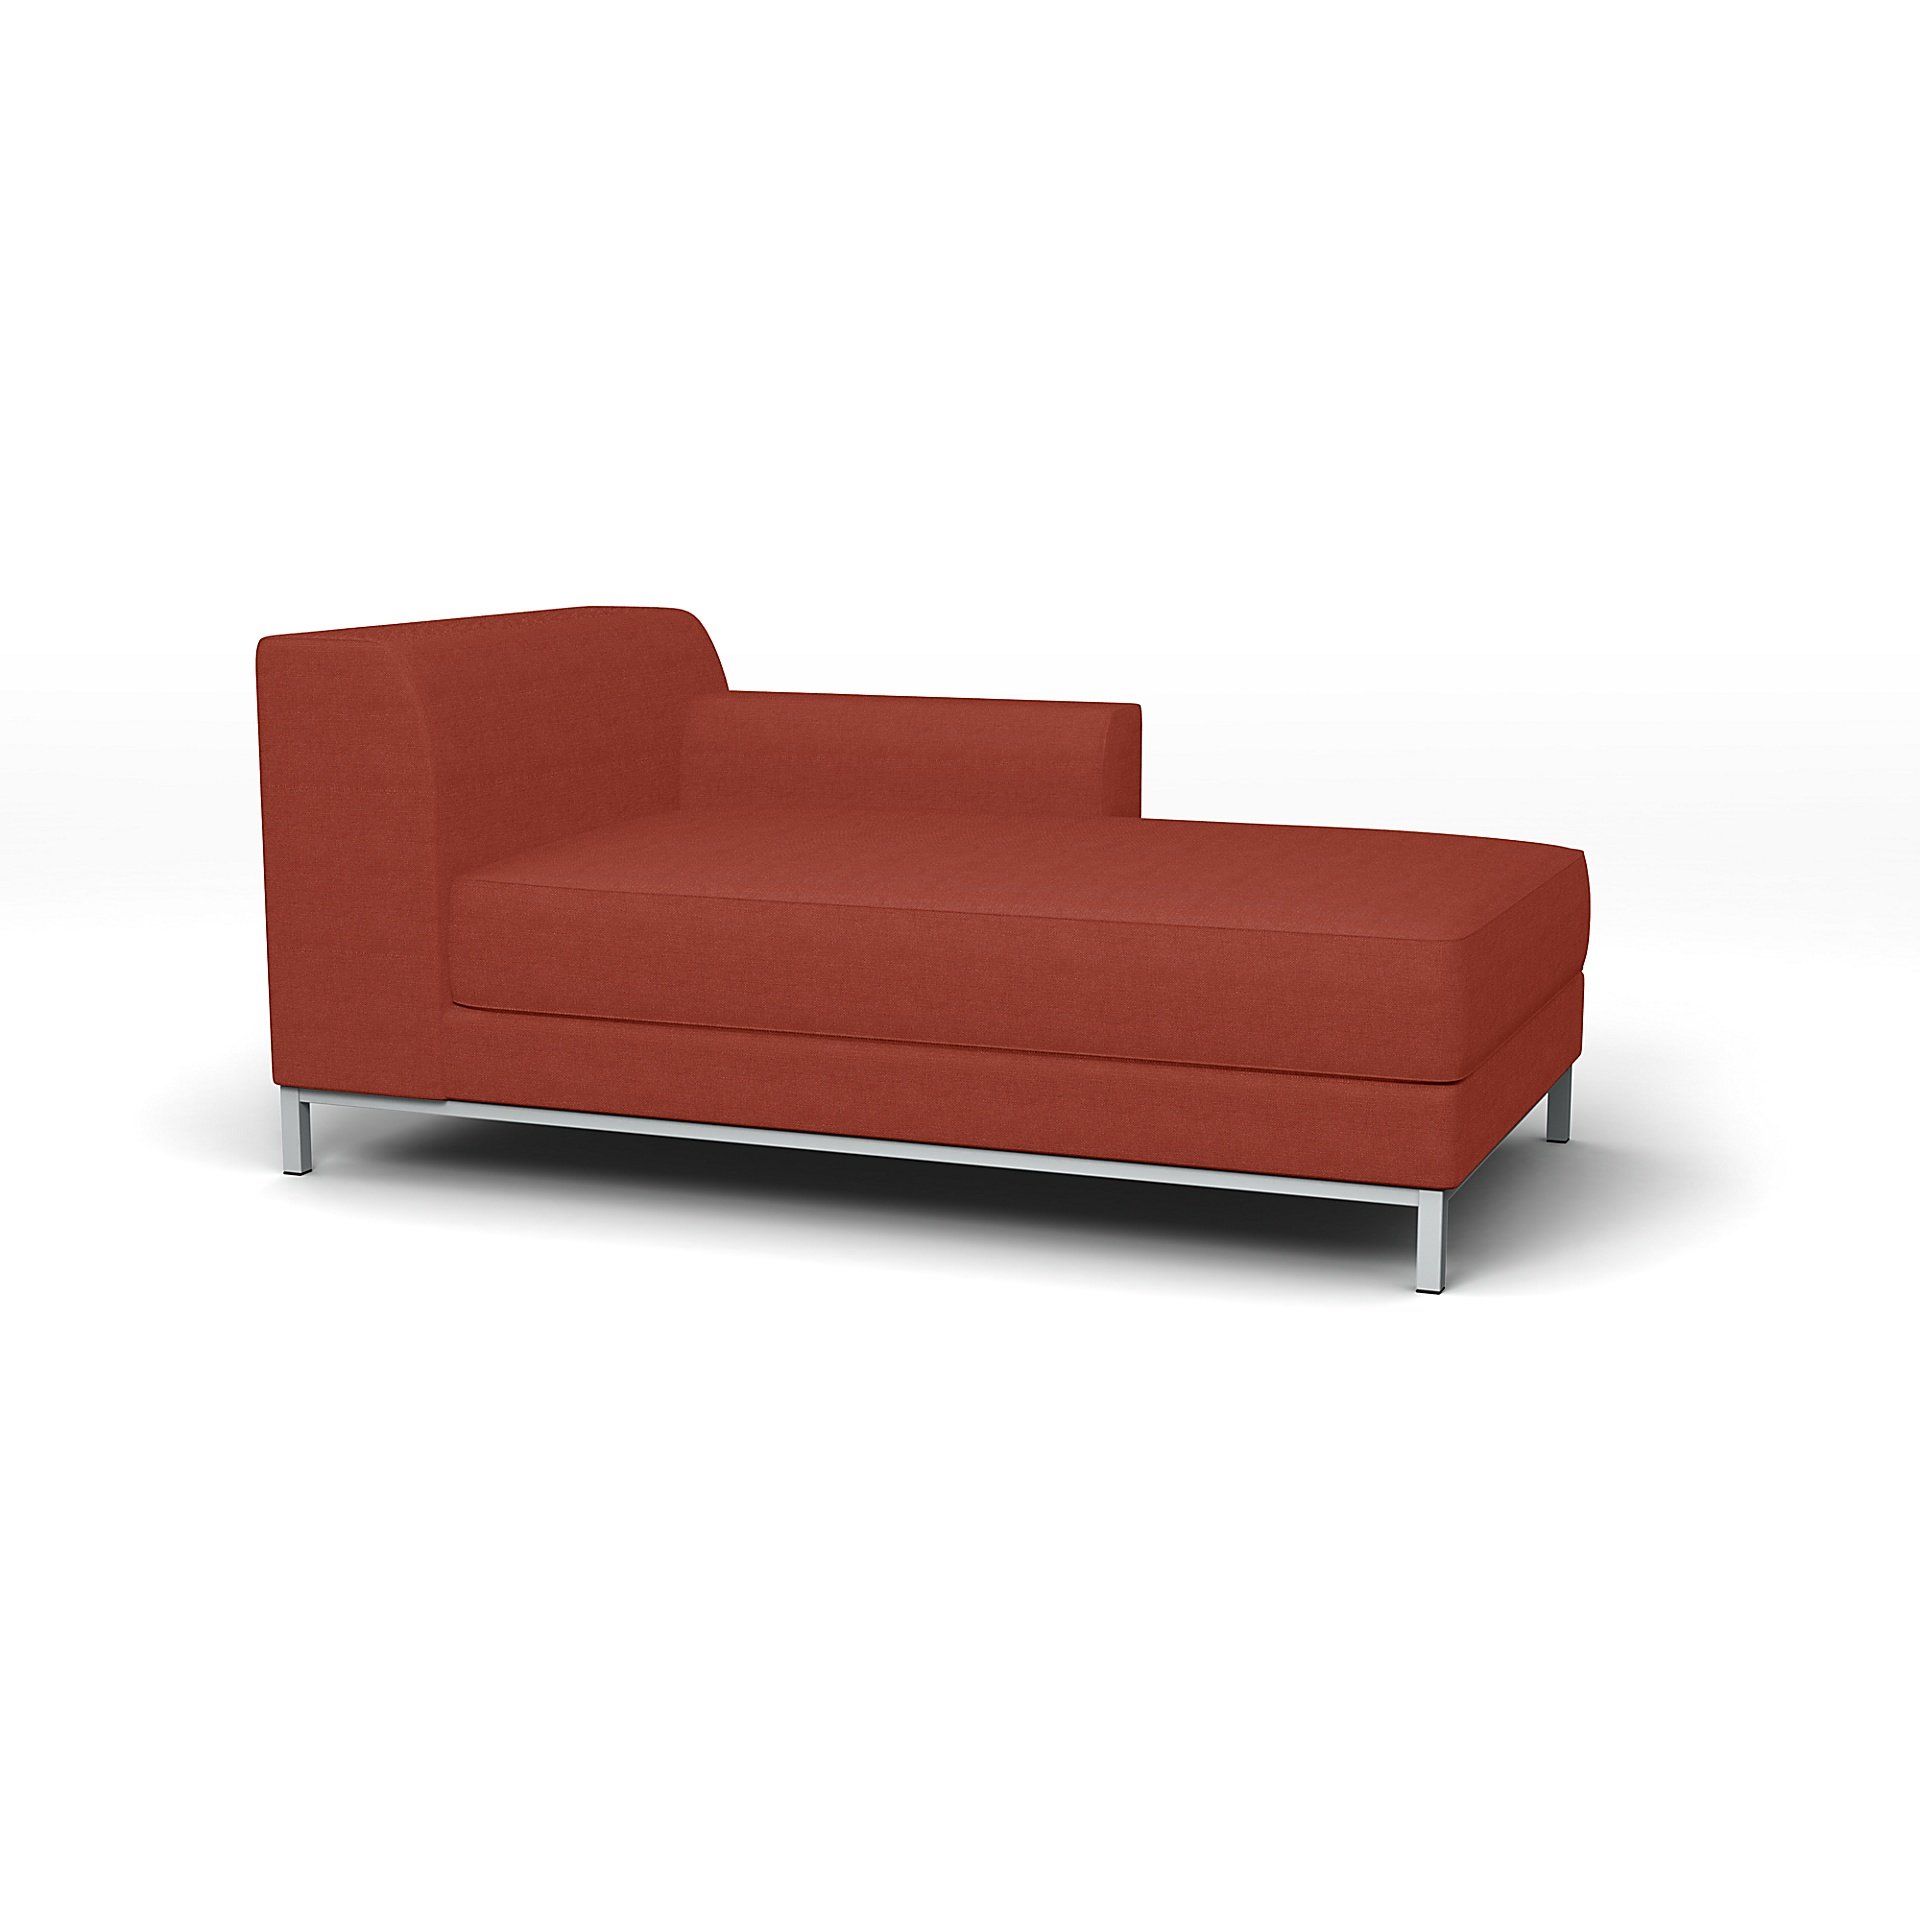 IKEA - Kramfors Chaise Longue with Right Arm Cover, Cayenne, Linen - Bemz